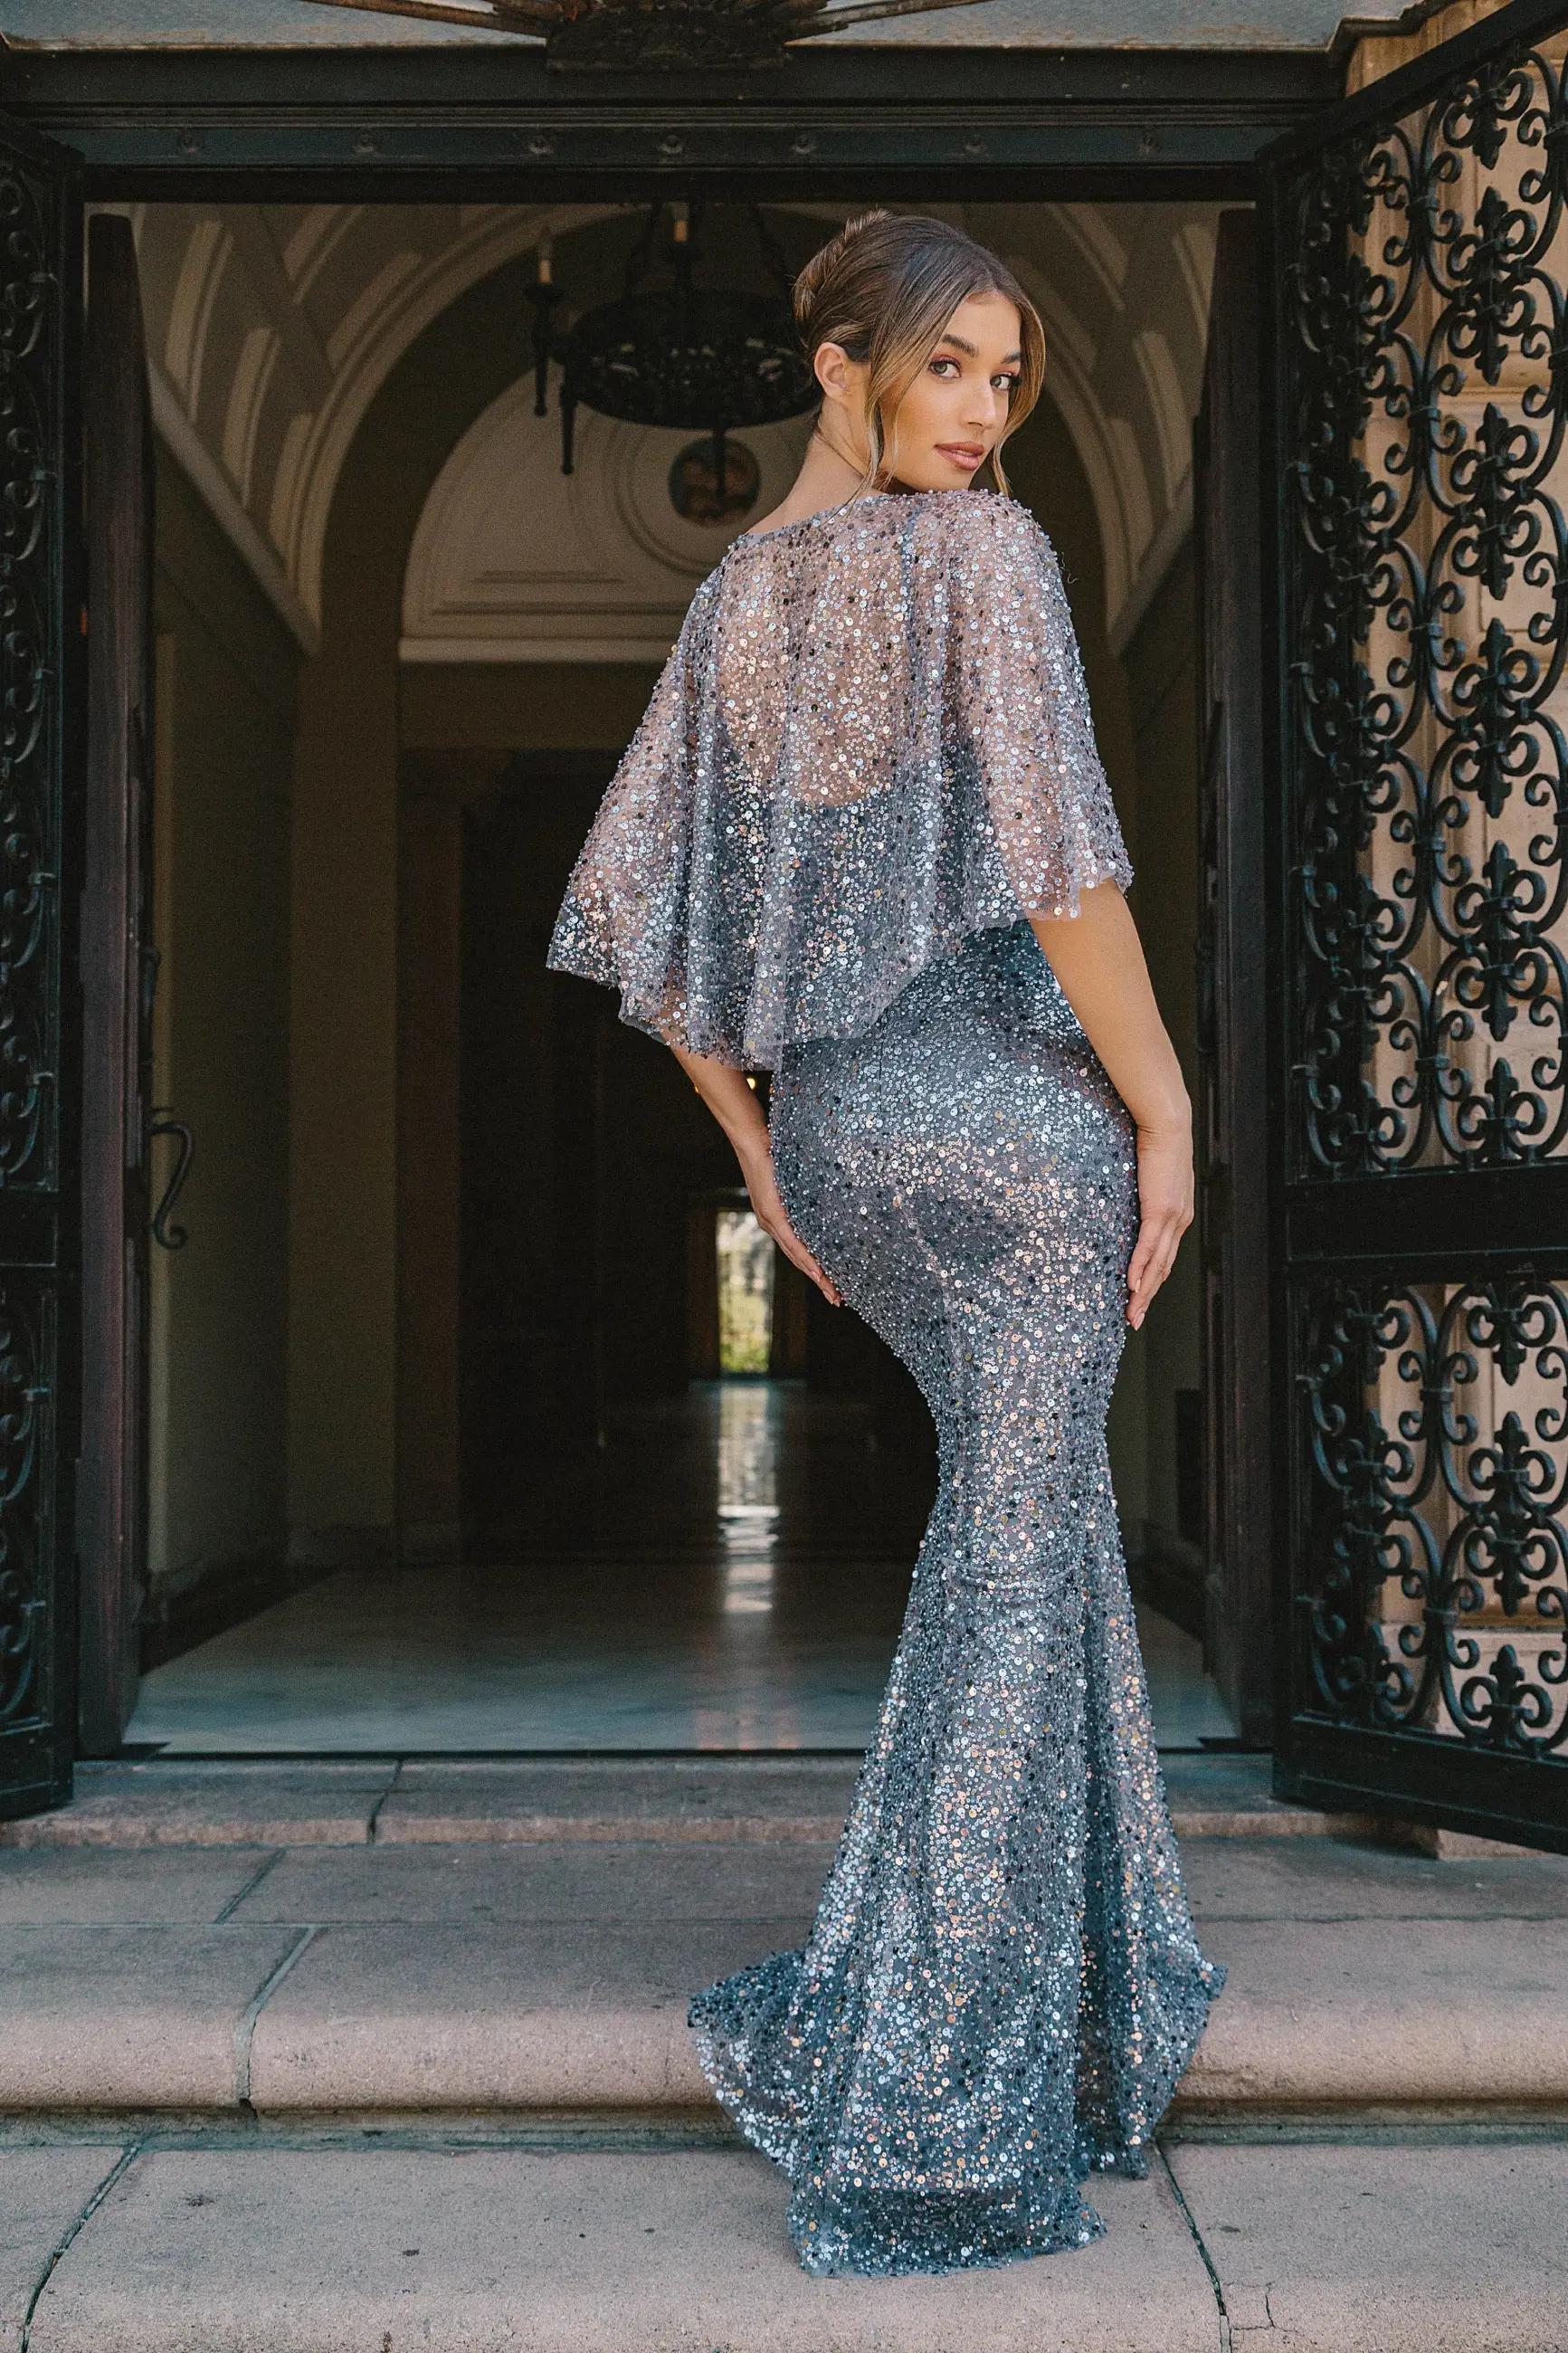 Model wearing a long silver evening gown near the building